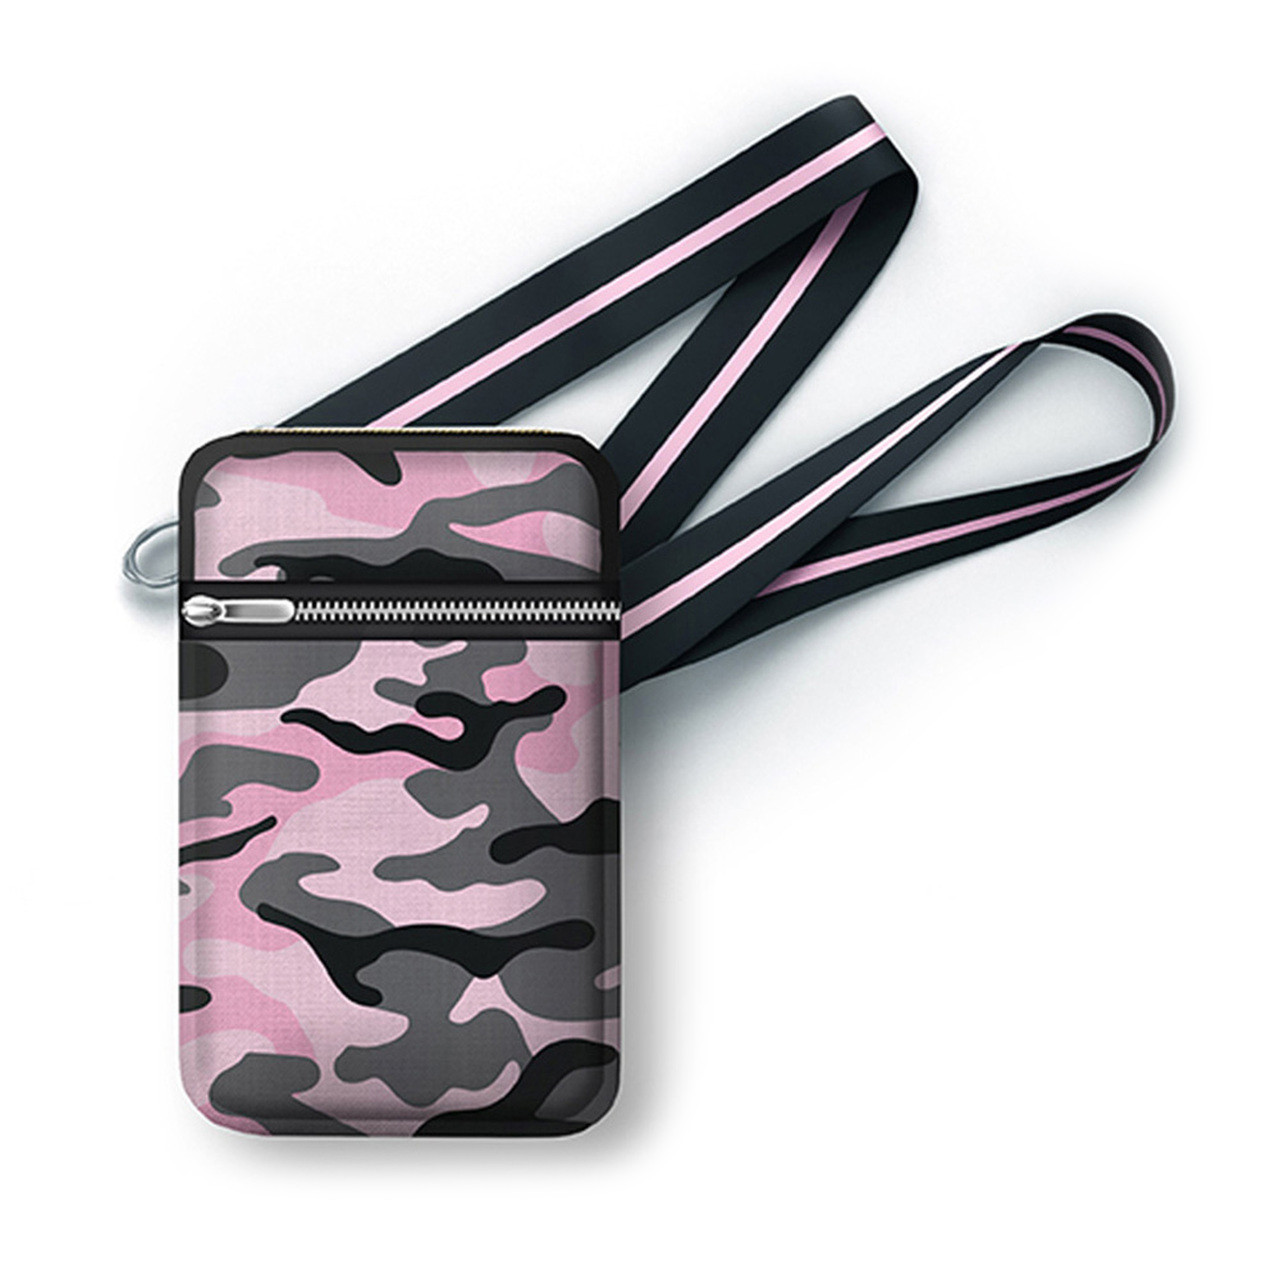 Top Trenz cell phone wallet with canvas material printed pink and gray camouflage